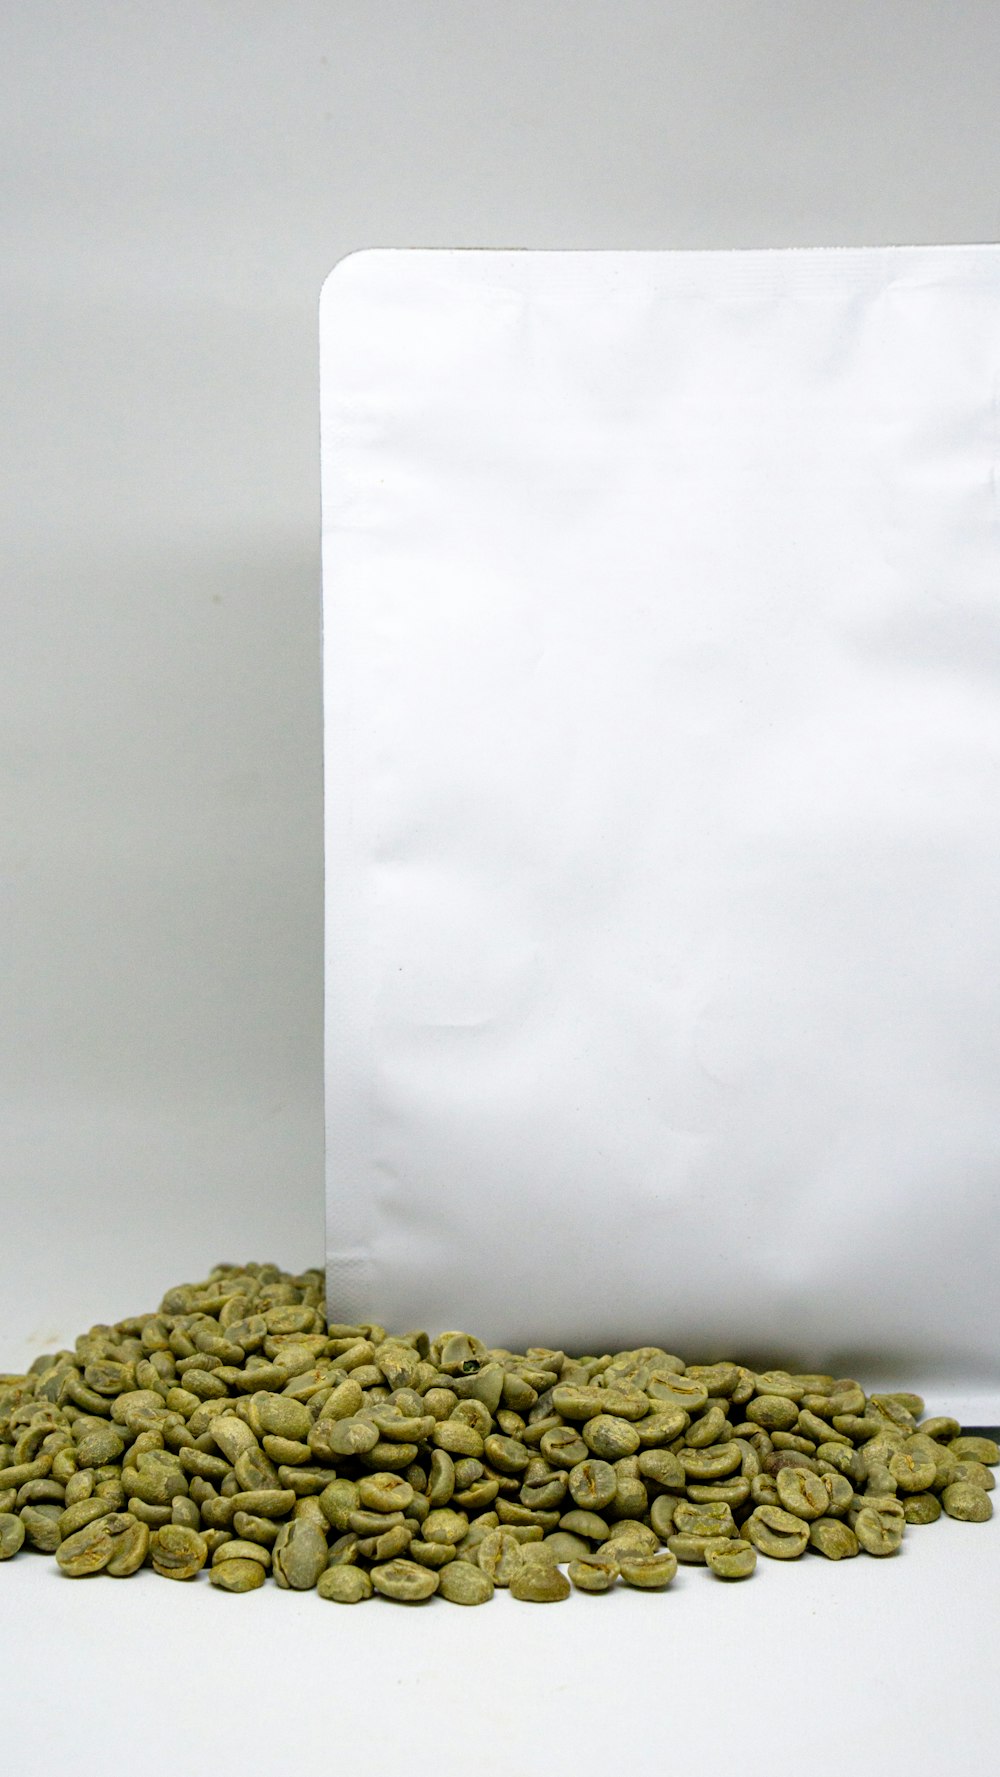 a pile of green coffee beans next to a white bag